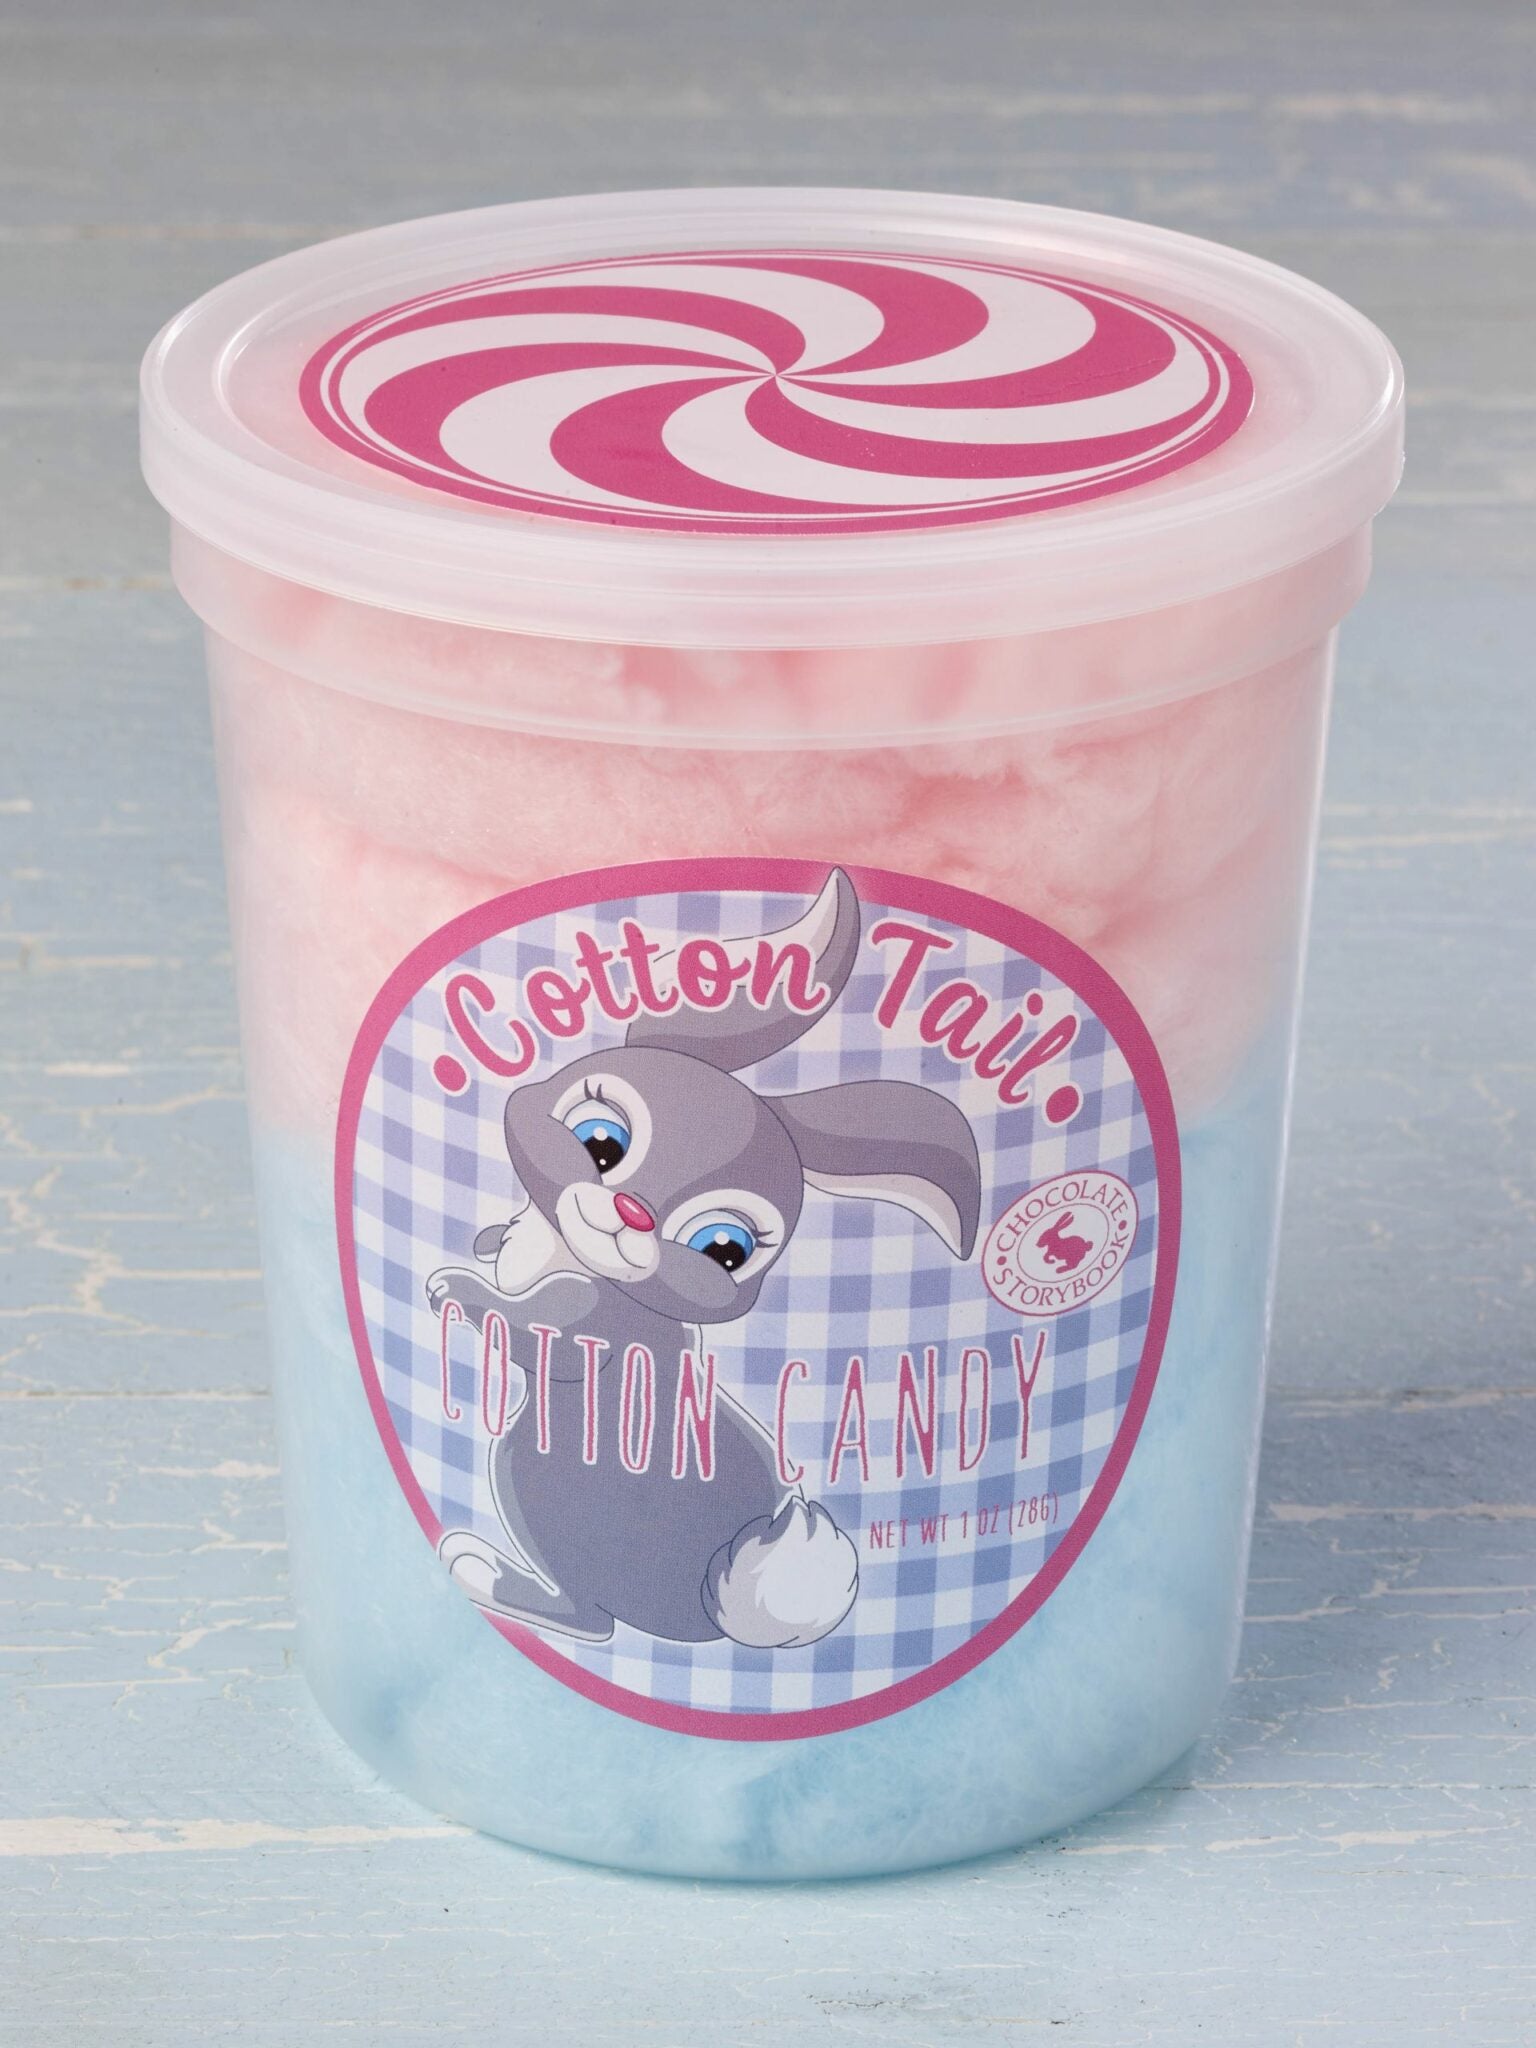 Cottontail - Cotton Candy